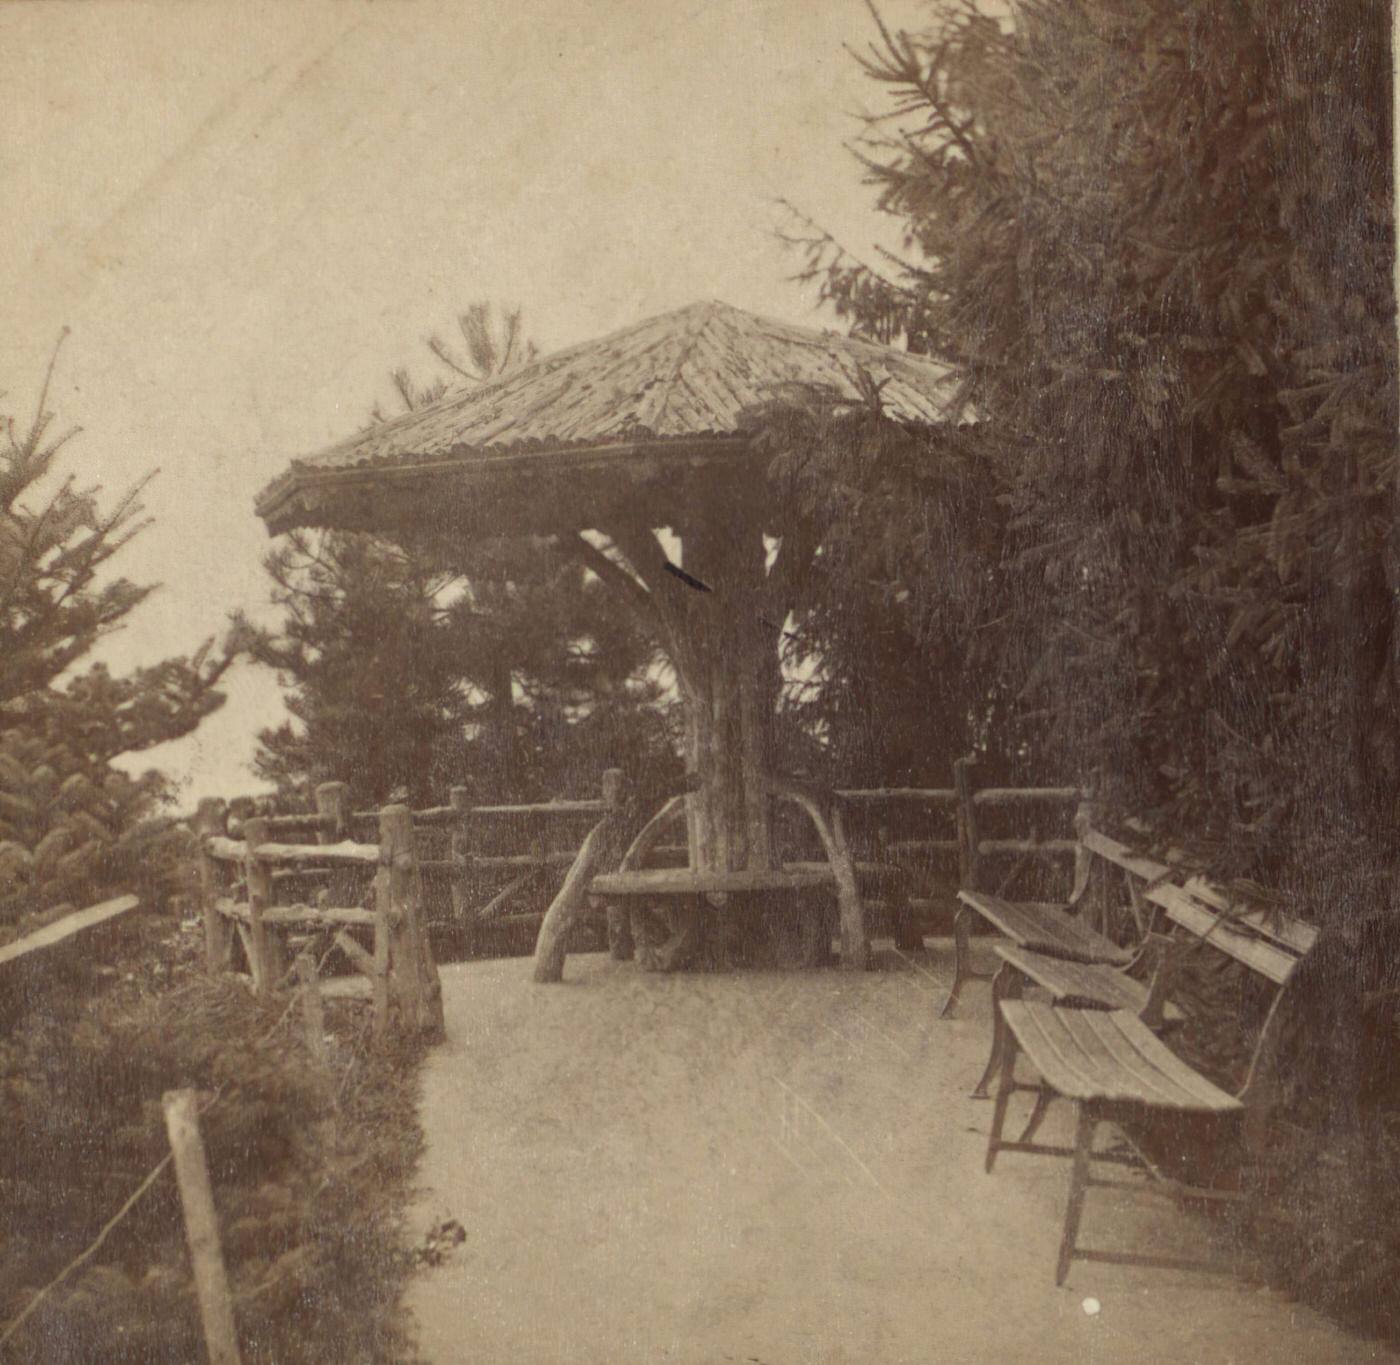 View Of Pathway And Seats, Central Park, Manhattan, New York City, 1890S